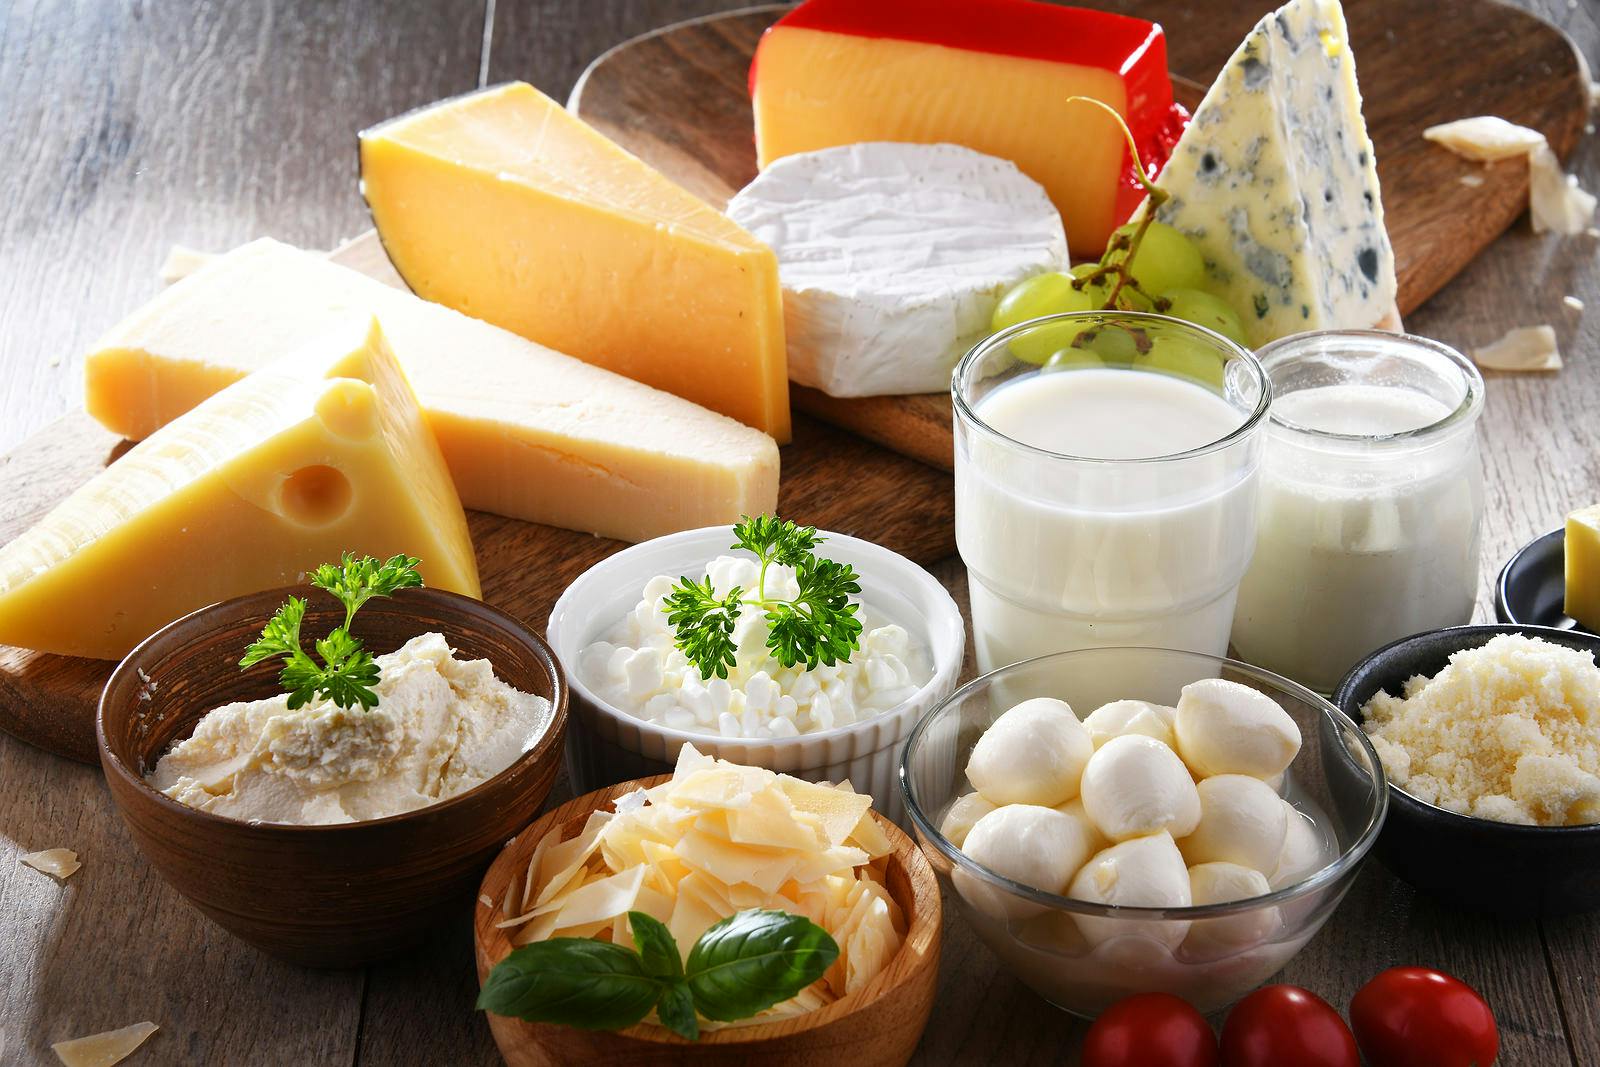 Variety of dairy products including cheese and milk can't be enjoyed by people with lactose intolerance